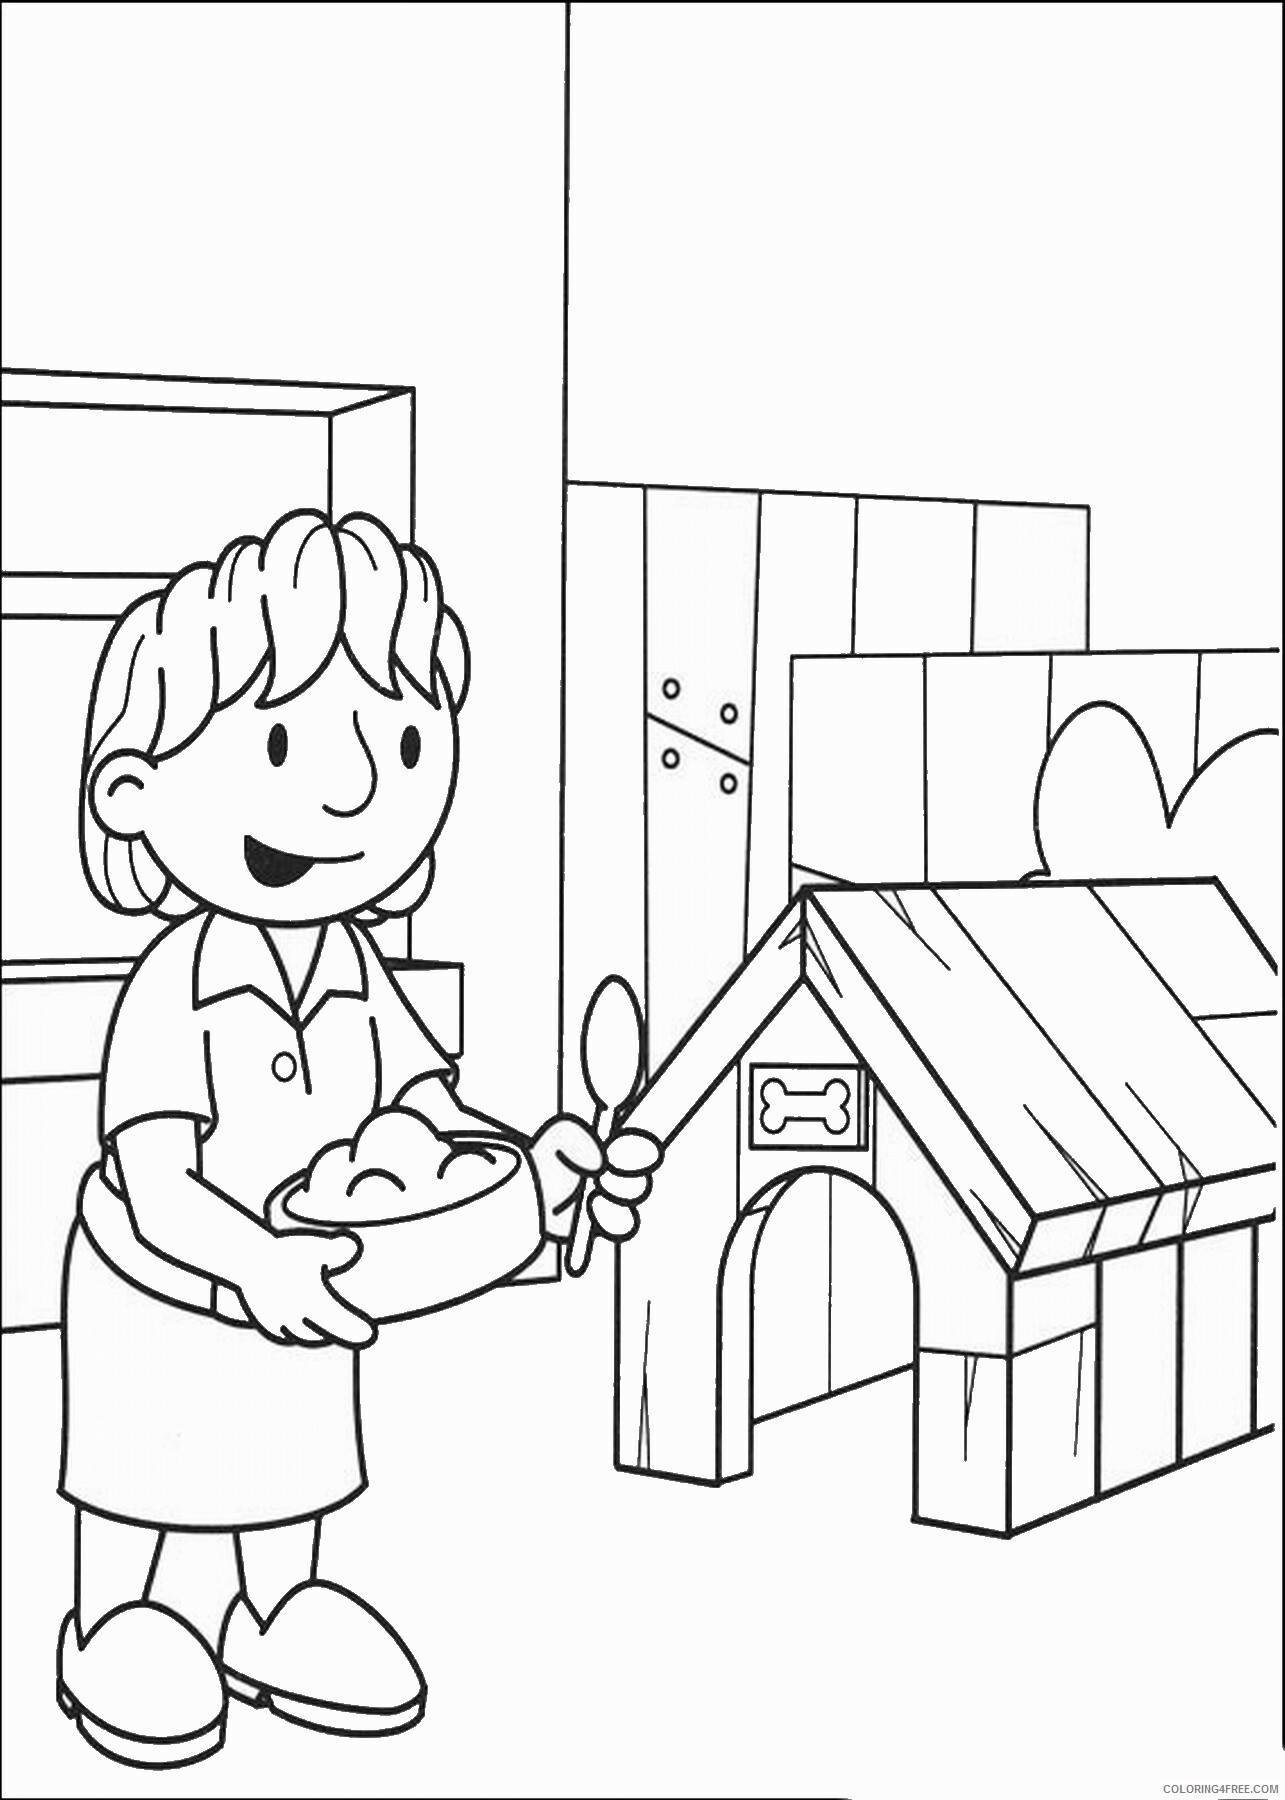 Bob the Builder Coloring Pages TV Film bob the builder_08 Printable 2020 00958 Coloring4free